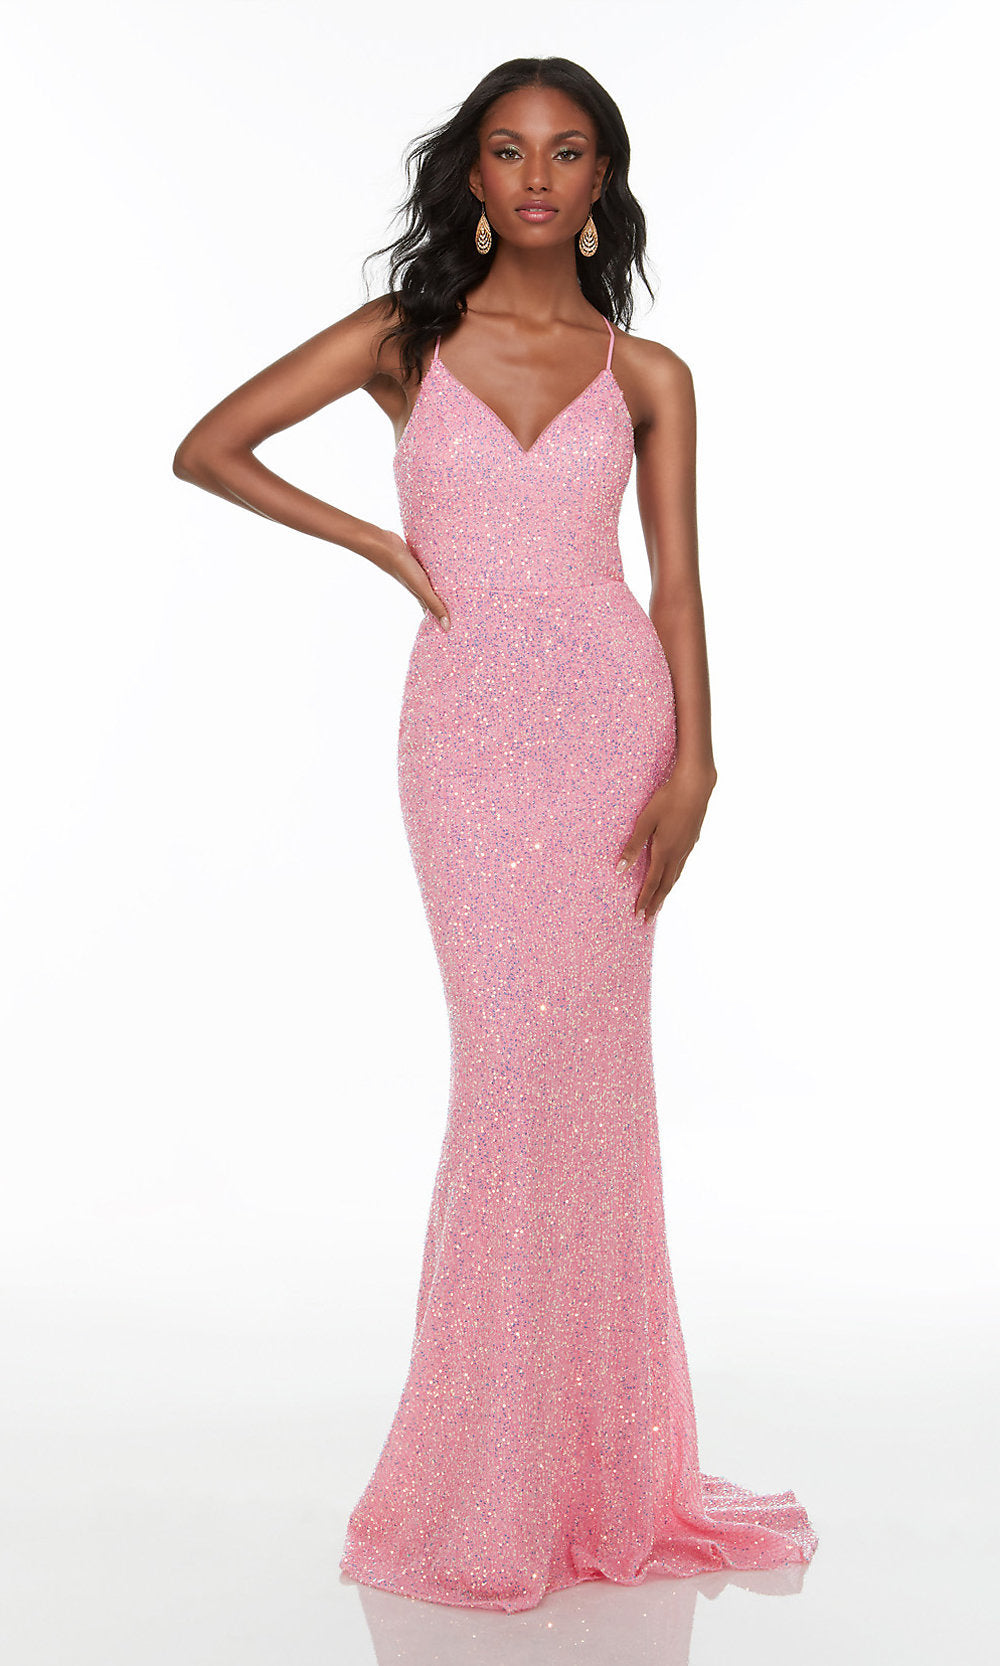 Long Sequin Pastel Prom Dress with Train - PromGirl